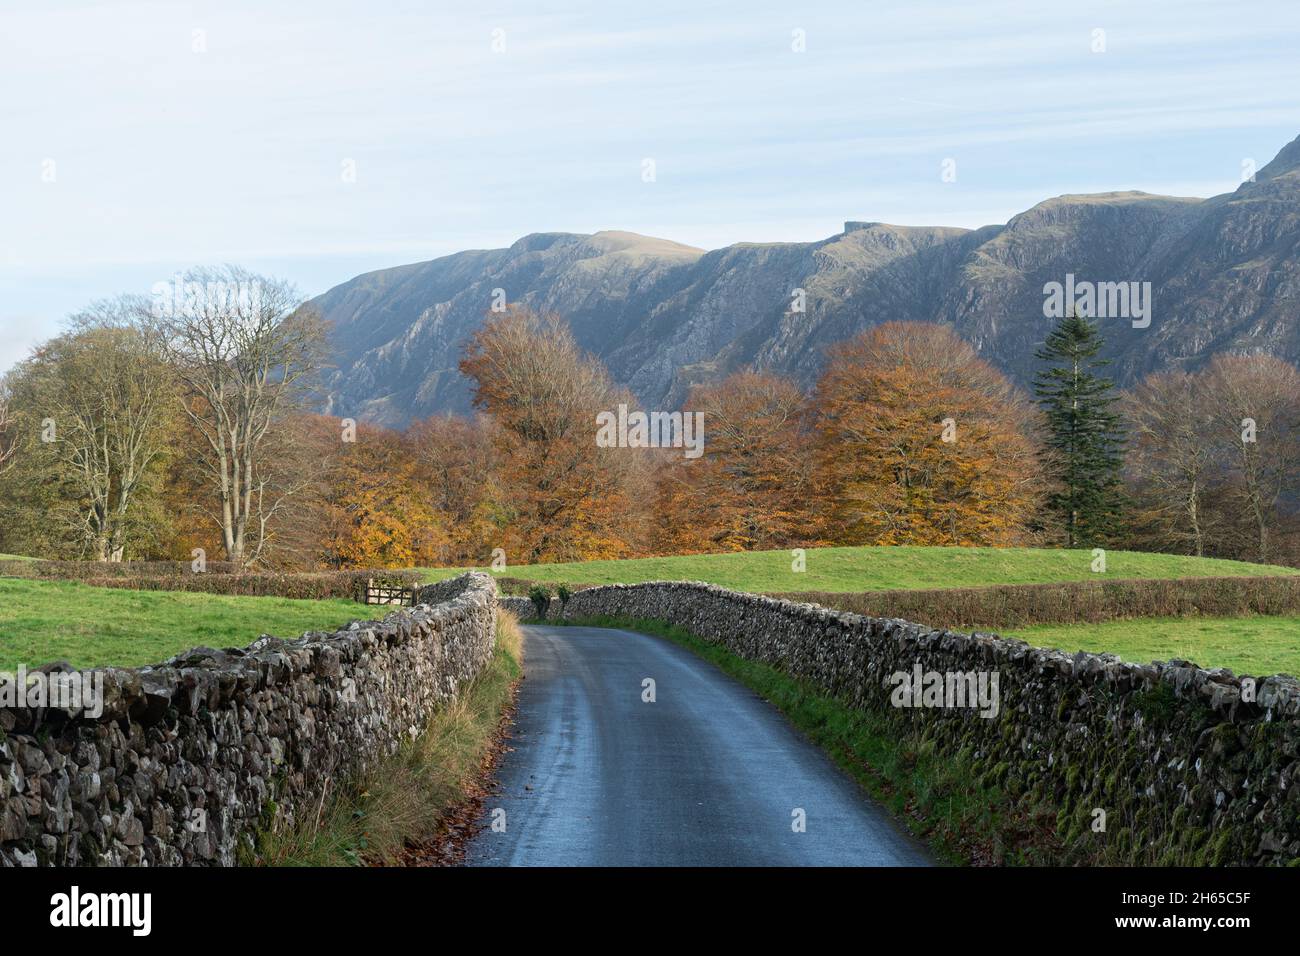 Narrow country lane bordered by dry stone walls near Wast Water (Wastwater) in Cumbria, England, UK, during autumn with steep mountain peaks Stock Photo